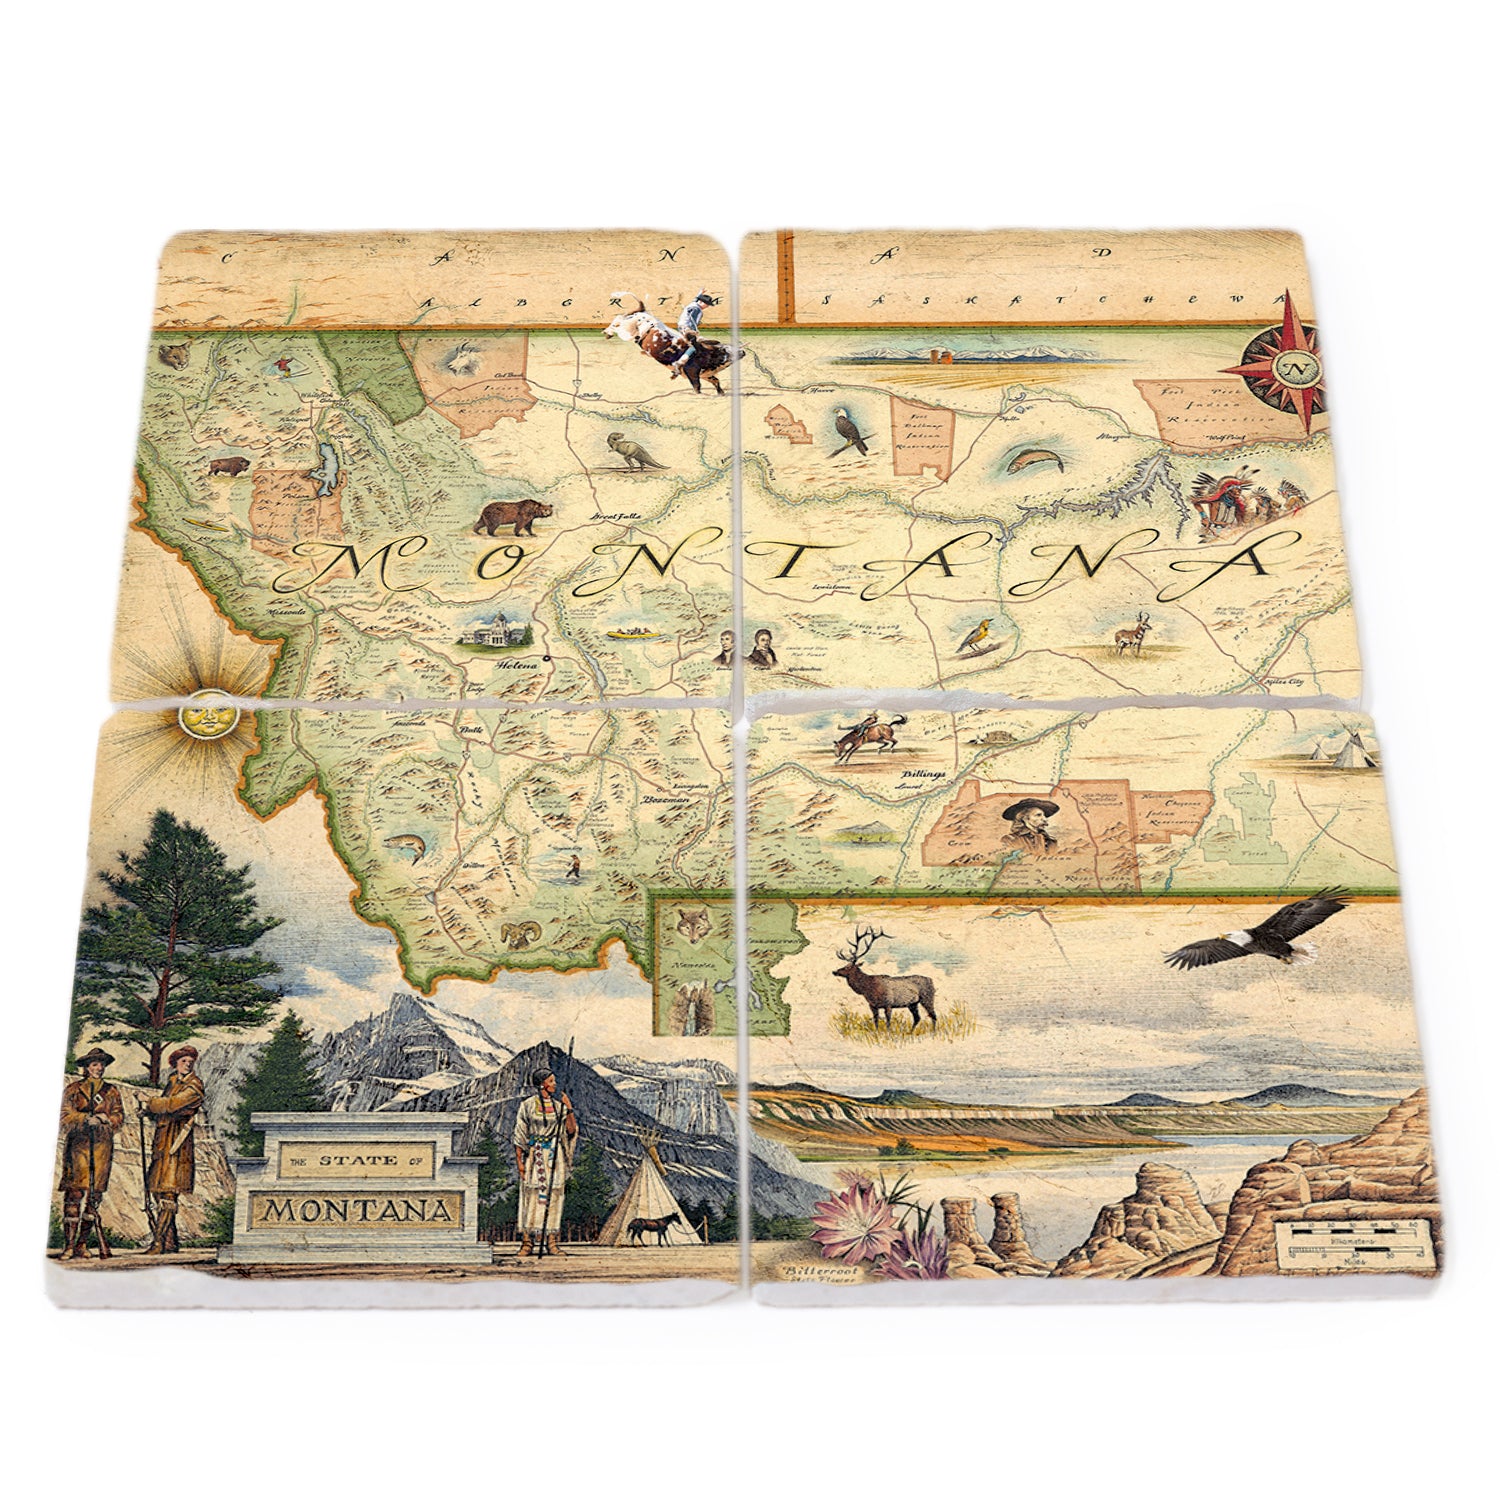 Montana Natural Stone Coaster Set by Xplorer Maps comes in a set of four making up the map of Montana. The map is featuring Sacajawea, Lewis & Clark, Yellowstone, Glacier National Park, Flathead Lake, grizzly bear, bald eagle, and elk. Cities like Missoula, Bozeman, Helena, and Whitefish are included in the map. 